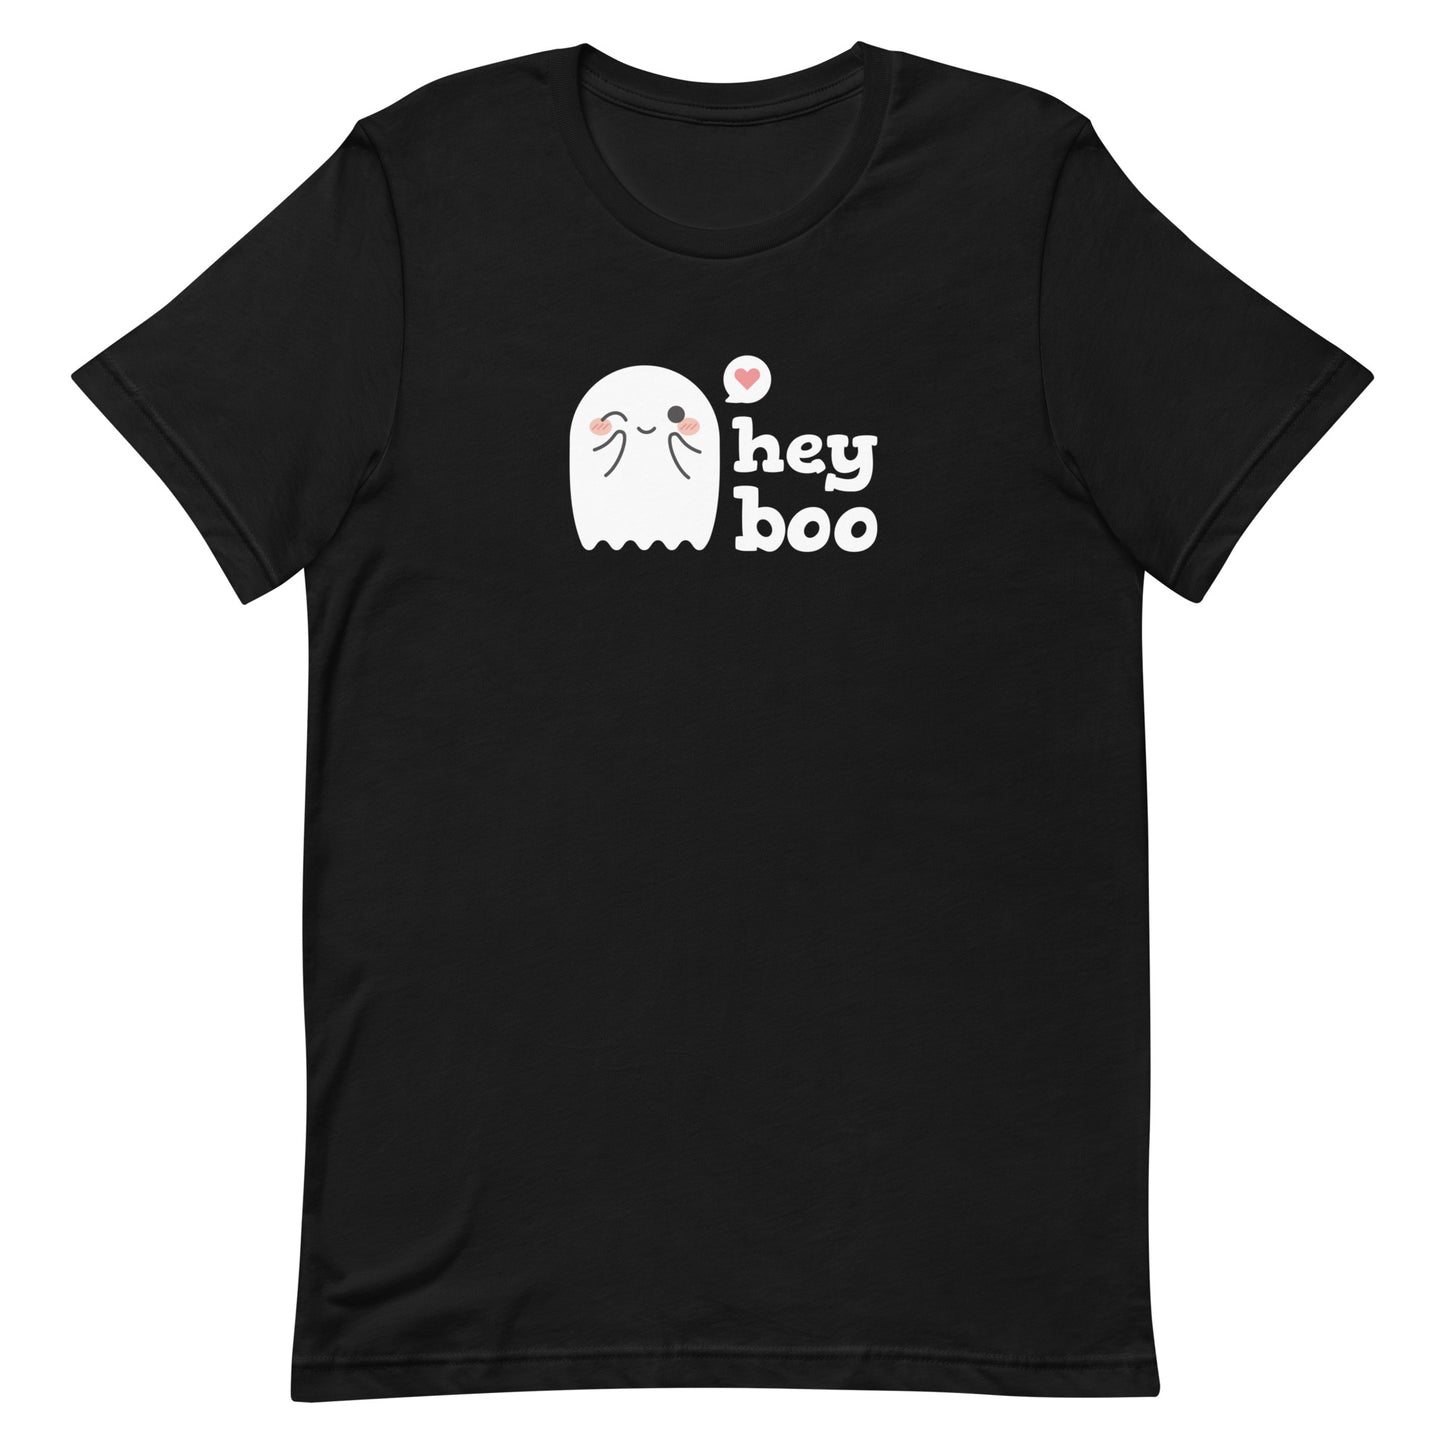 A black crewneck t-shirt featuring an image of a cute smiling and blushing ghost. Text alongside the ghost reads "hey boo"